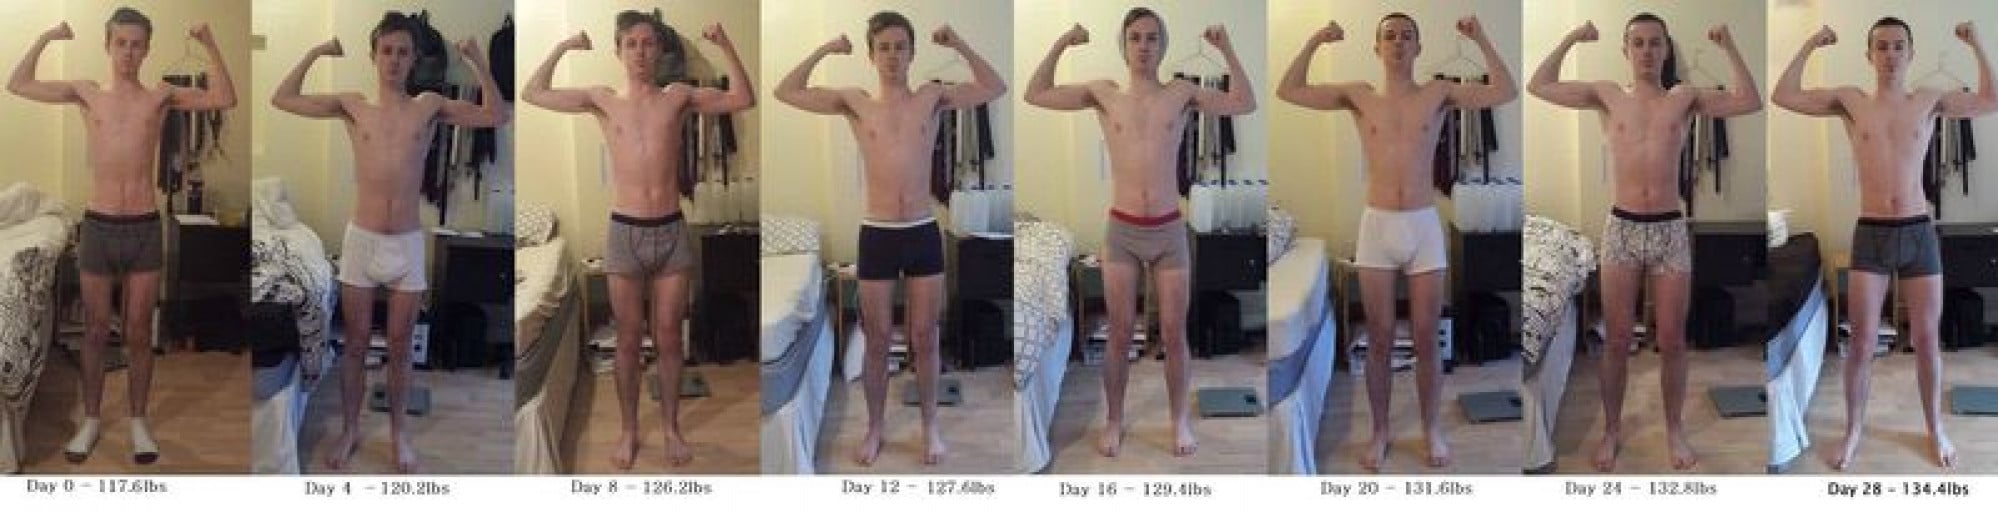 A photo of a 5'10" man showing a weight bulk from 117 pounds to 134 pounds. A total gain of 17 pounds.